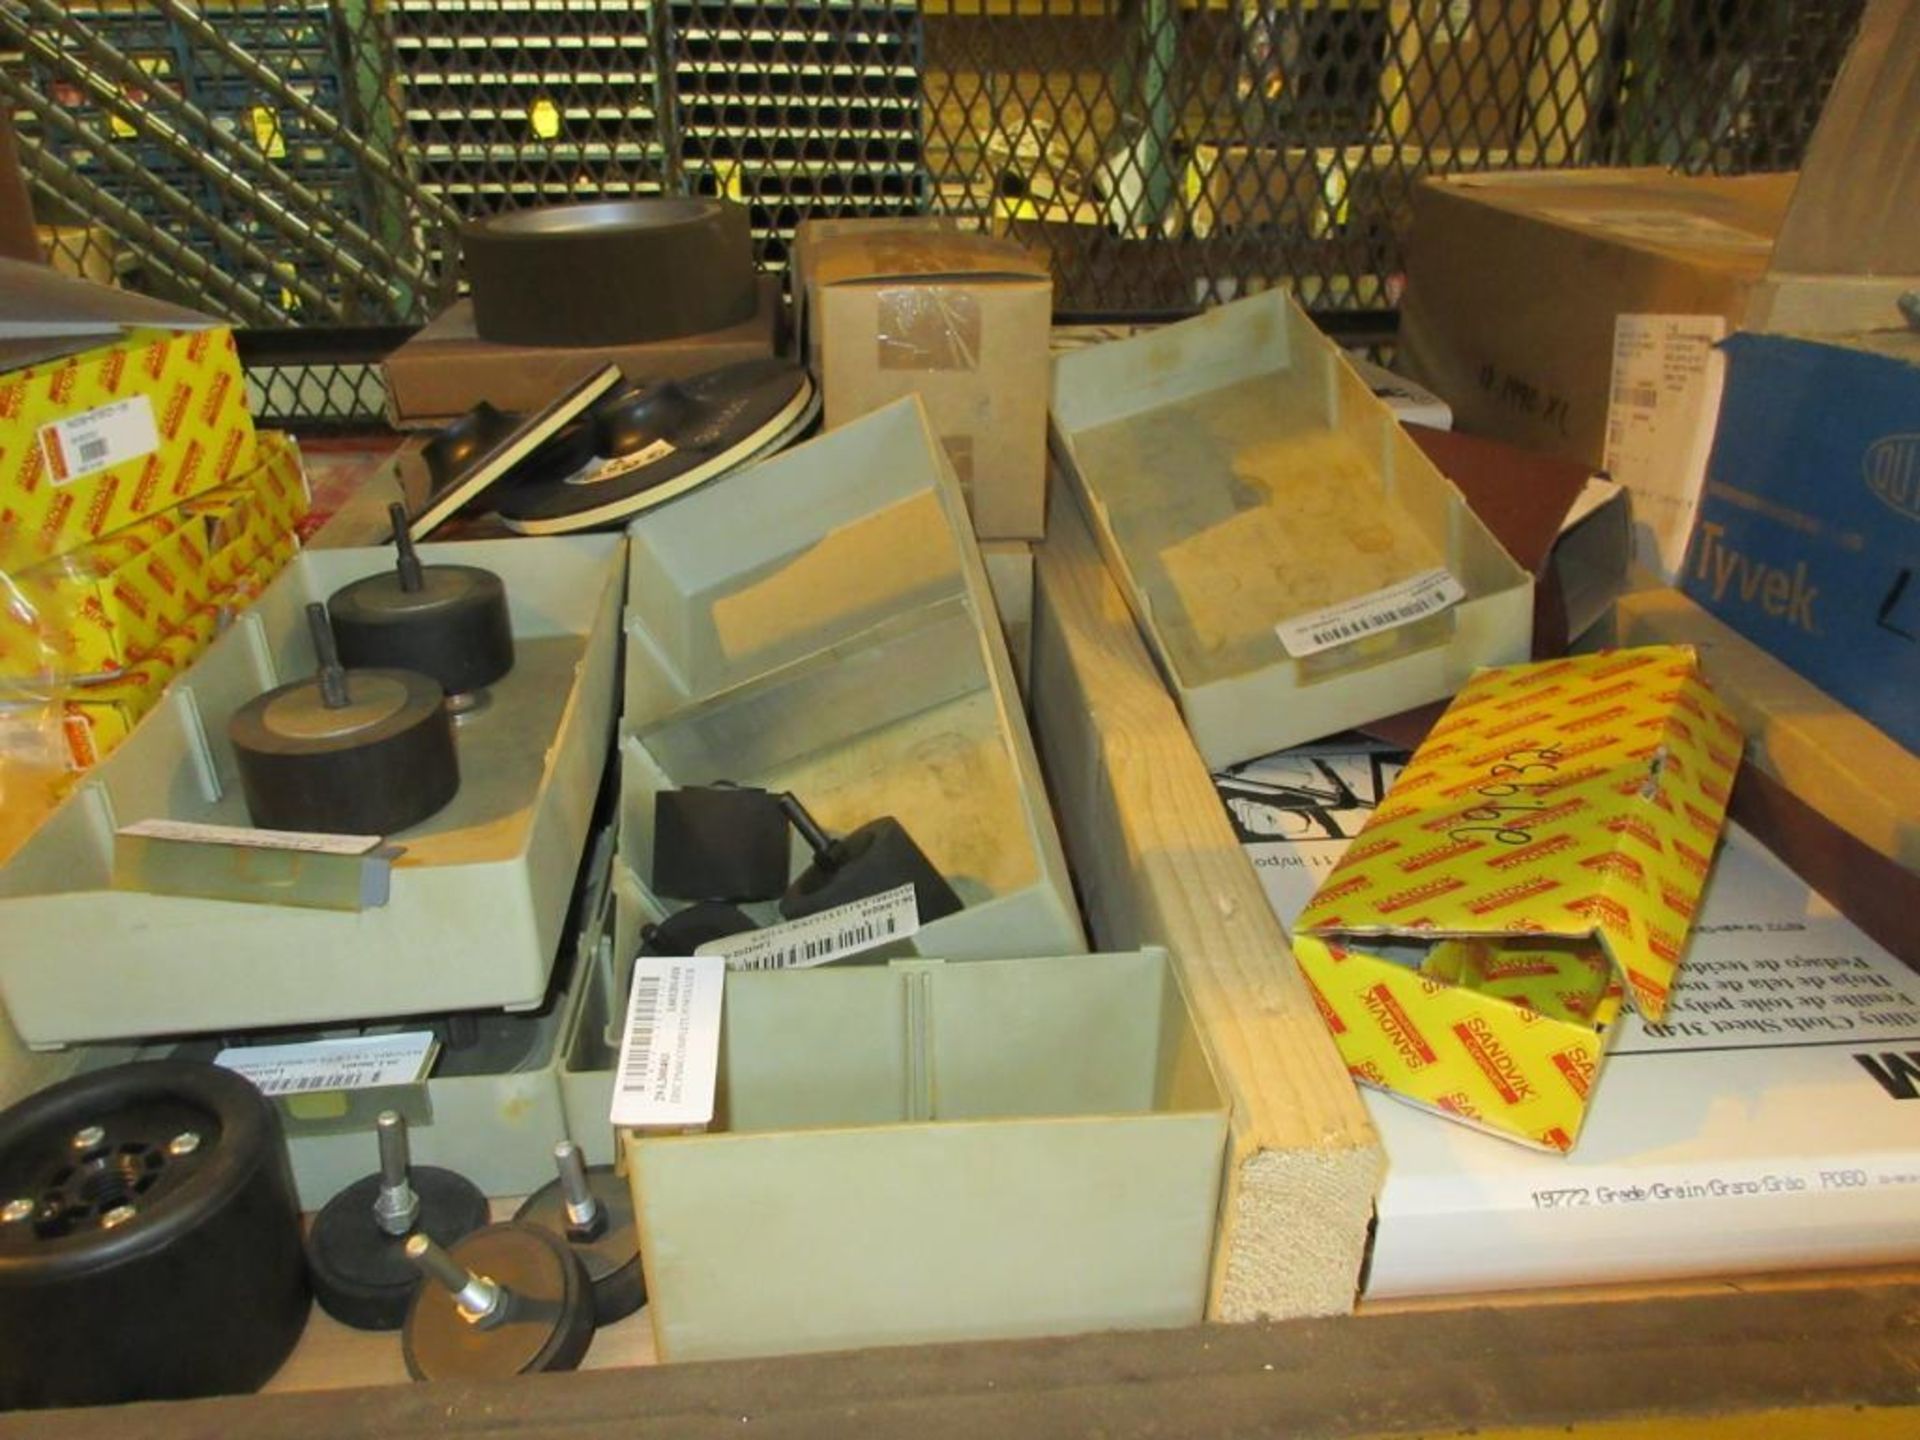 CONTENTS OF (22) SECTIONS PALLET RACK: ASSORTED ABRASIVES, SUNNEN STONES, TOOL BITS, DOVETAIL CUTTER - Image 6 of 43